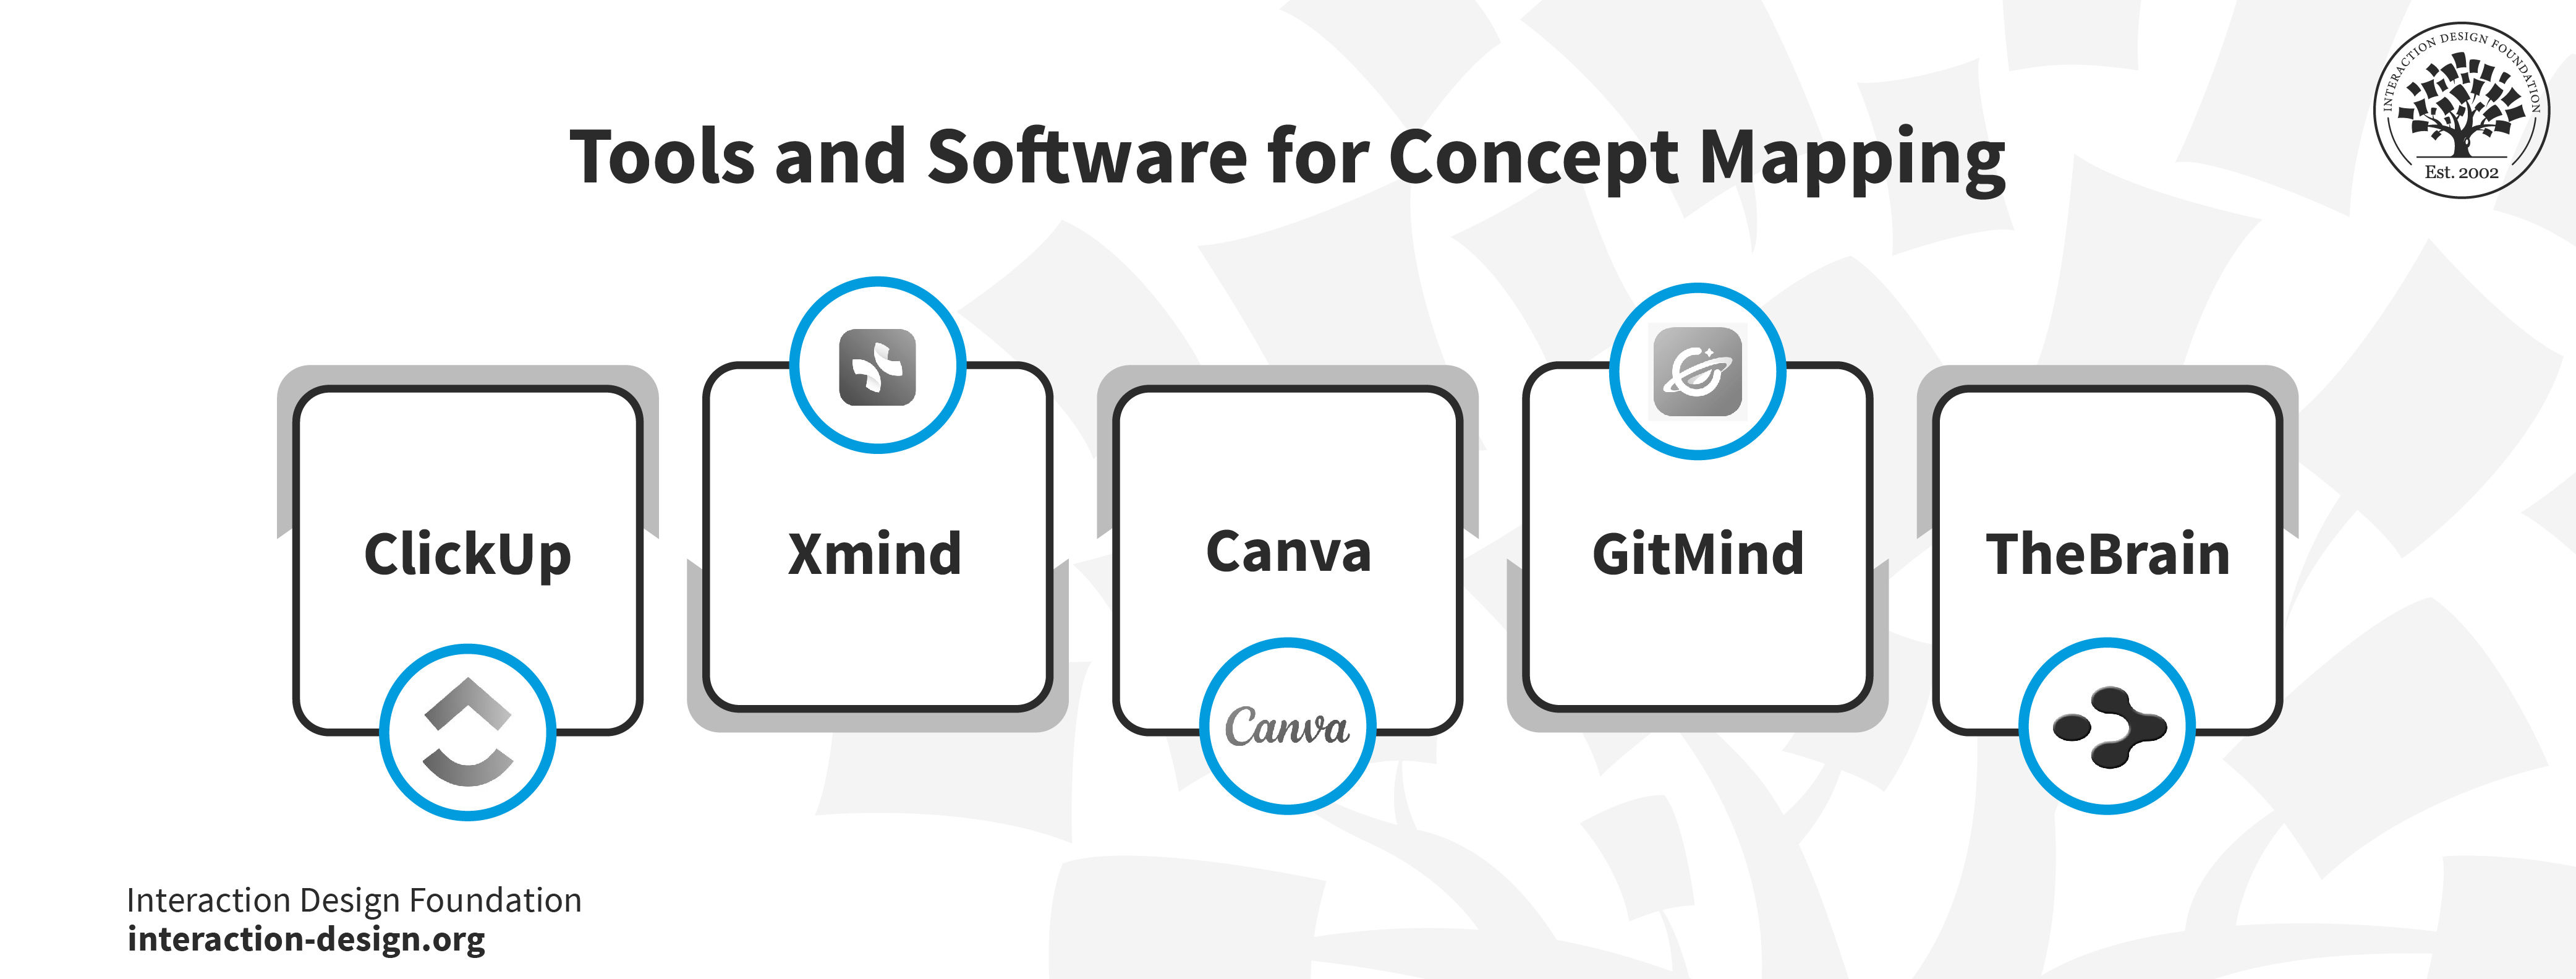 A graphic illustrating the essential tools and software used for concept mapping with their names and logos.